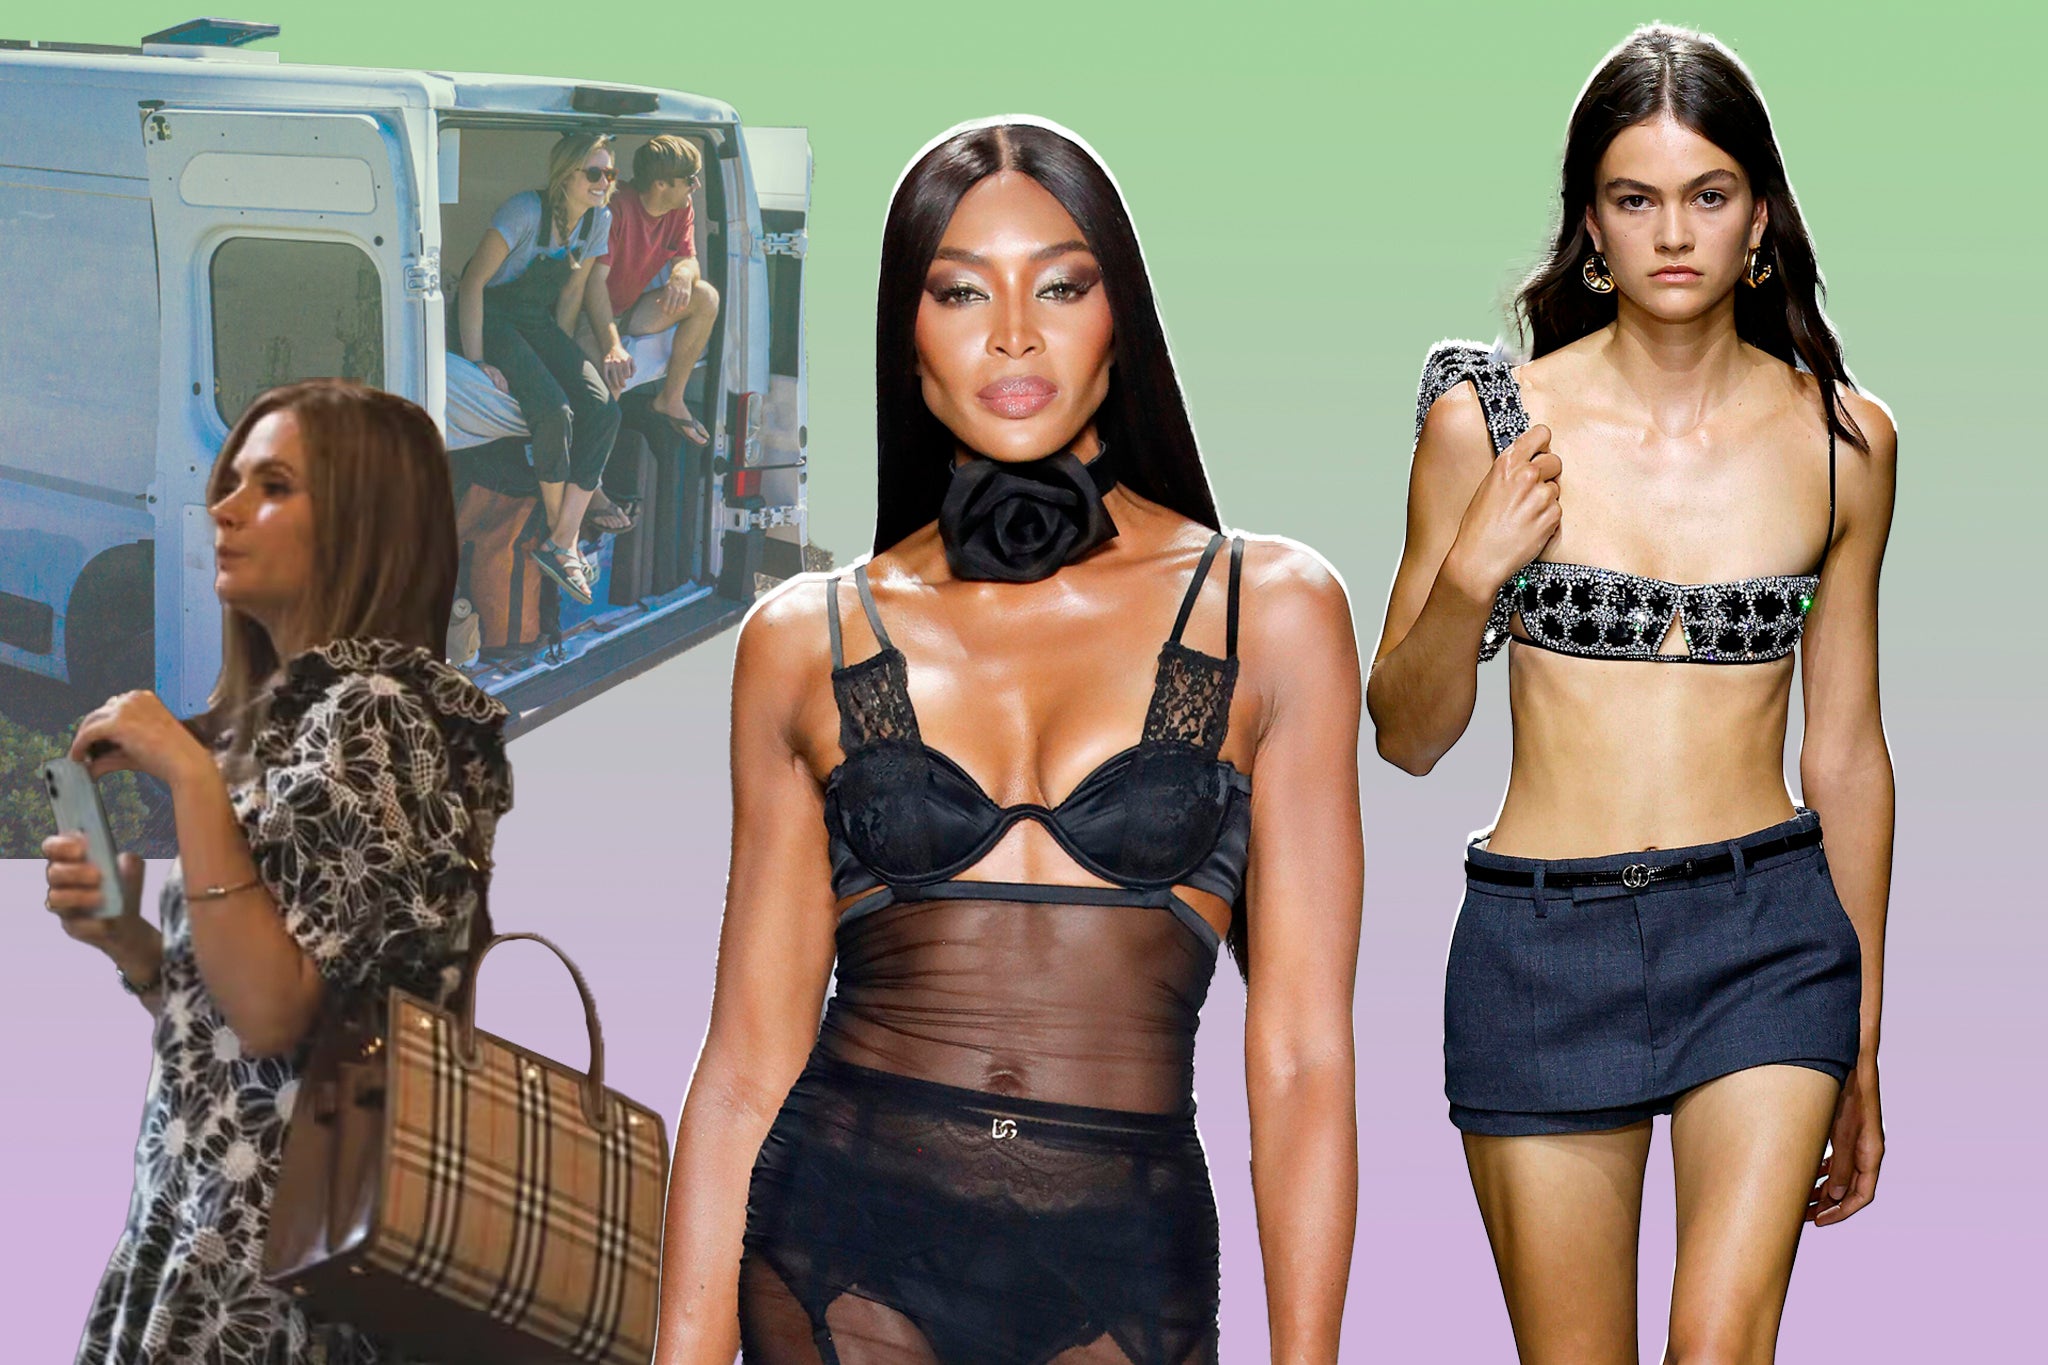 The Sheer Fashion Trend of Spring 2023: Embracing Free the Nipple